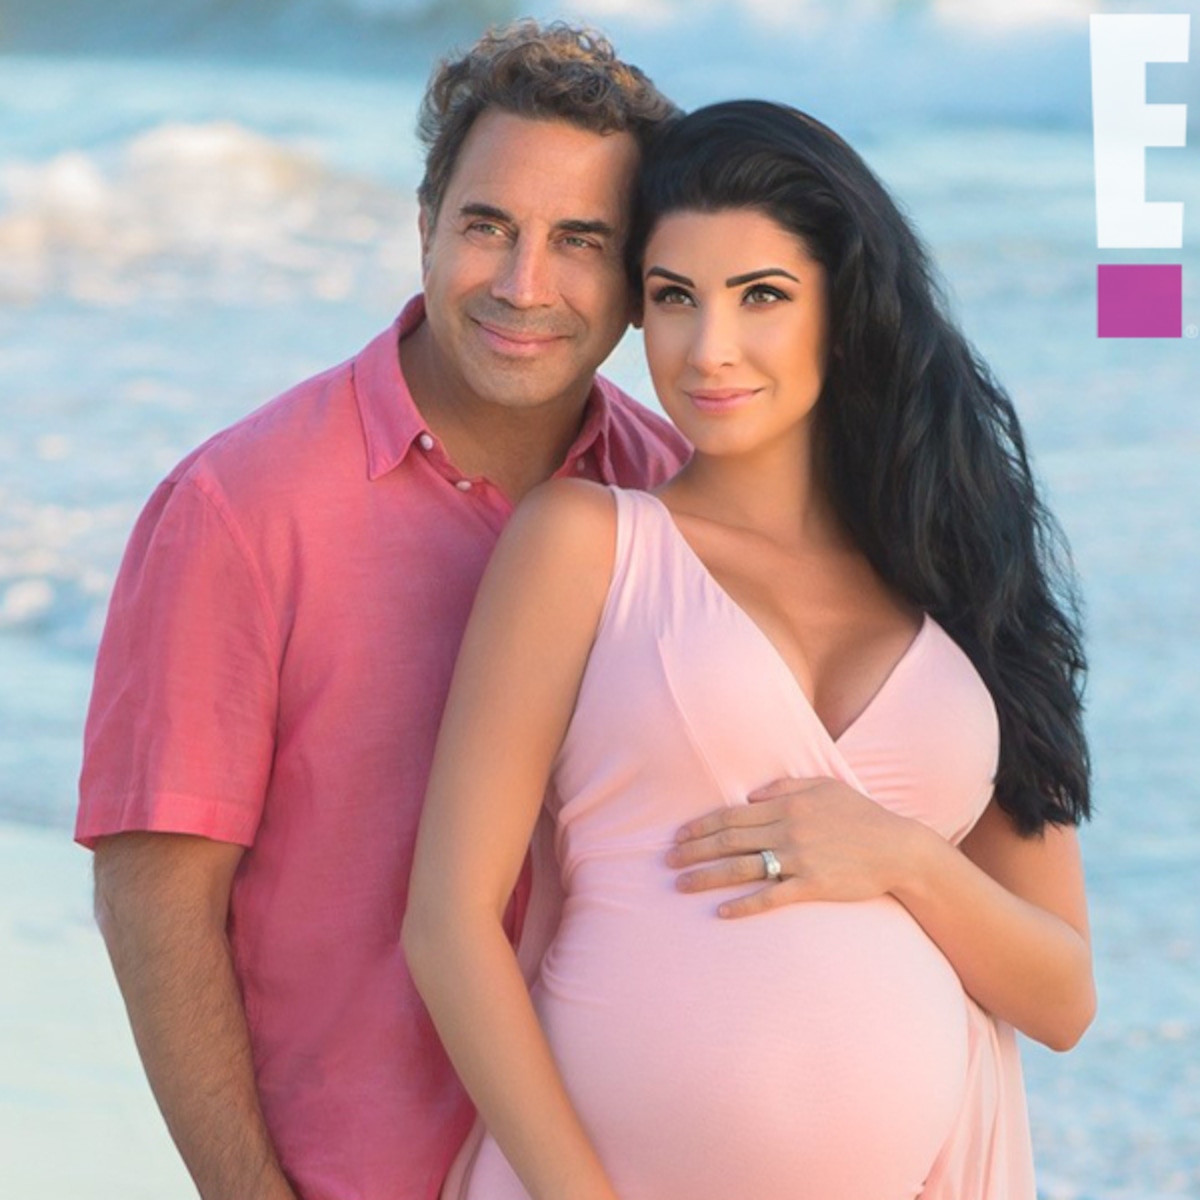 Dr. Paul Nassif & Wife Brittany Welcome a Baby Girl: Find Out Her Name